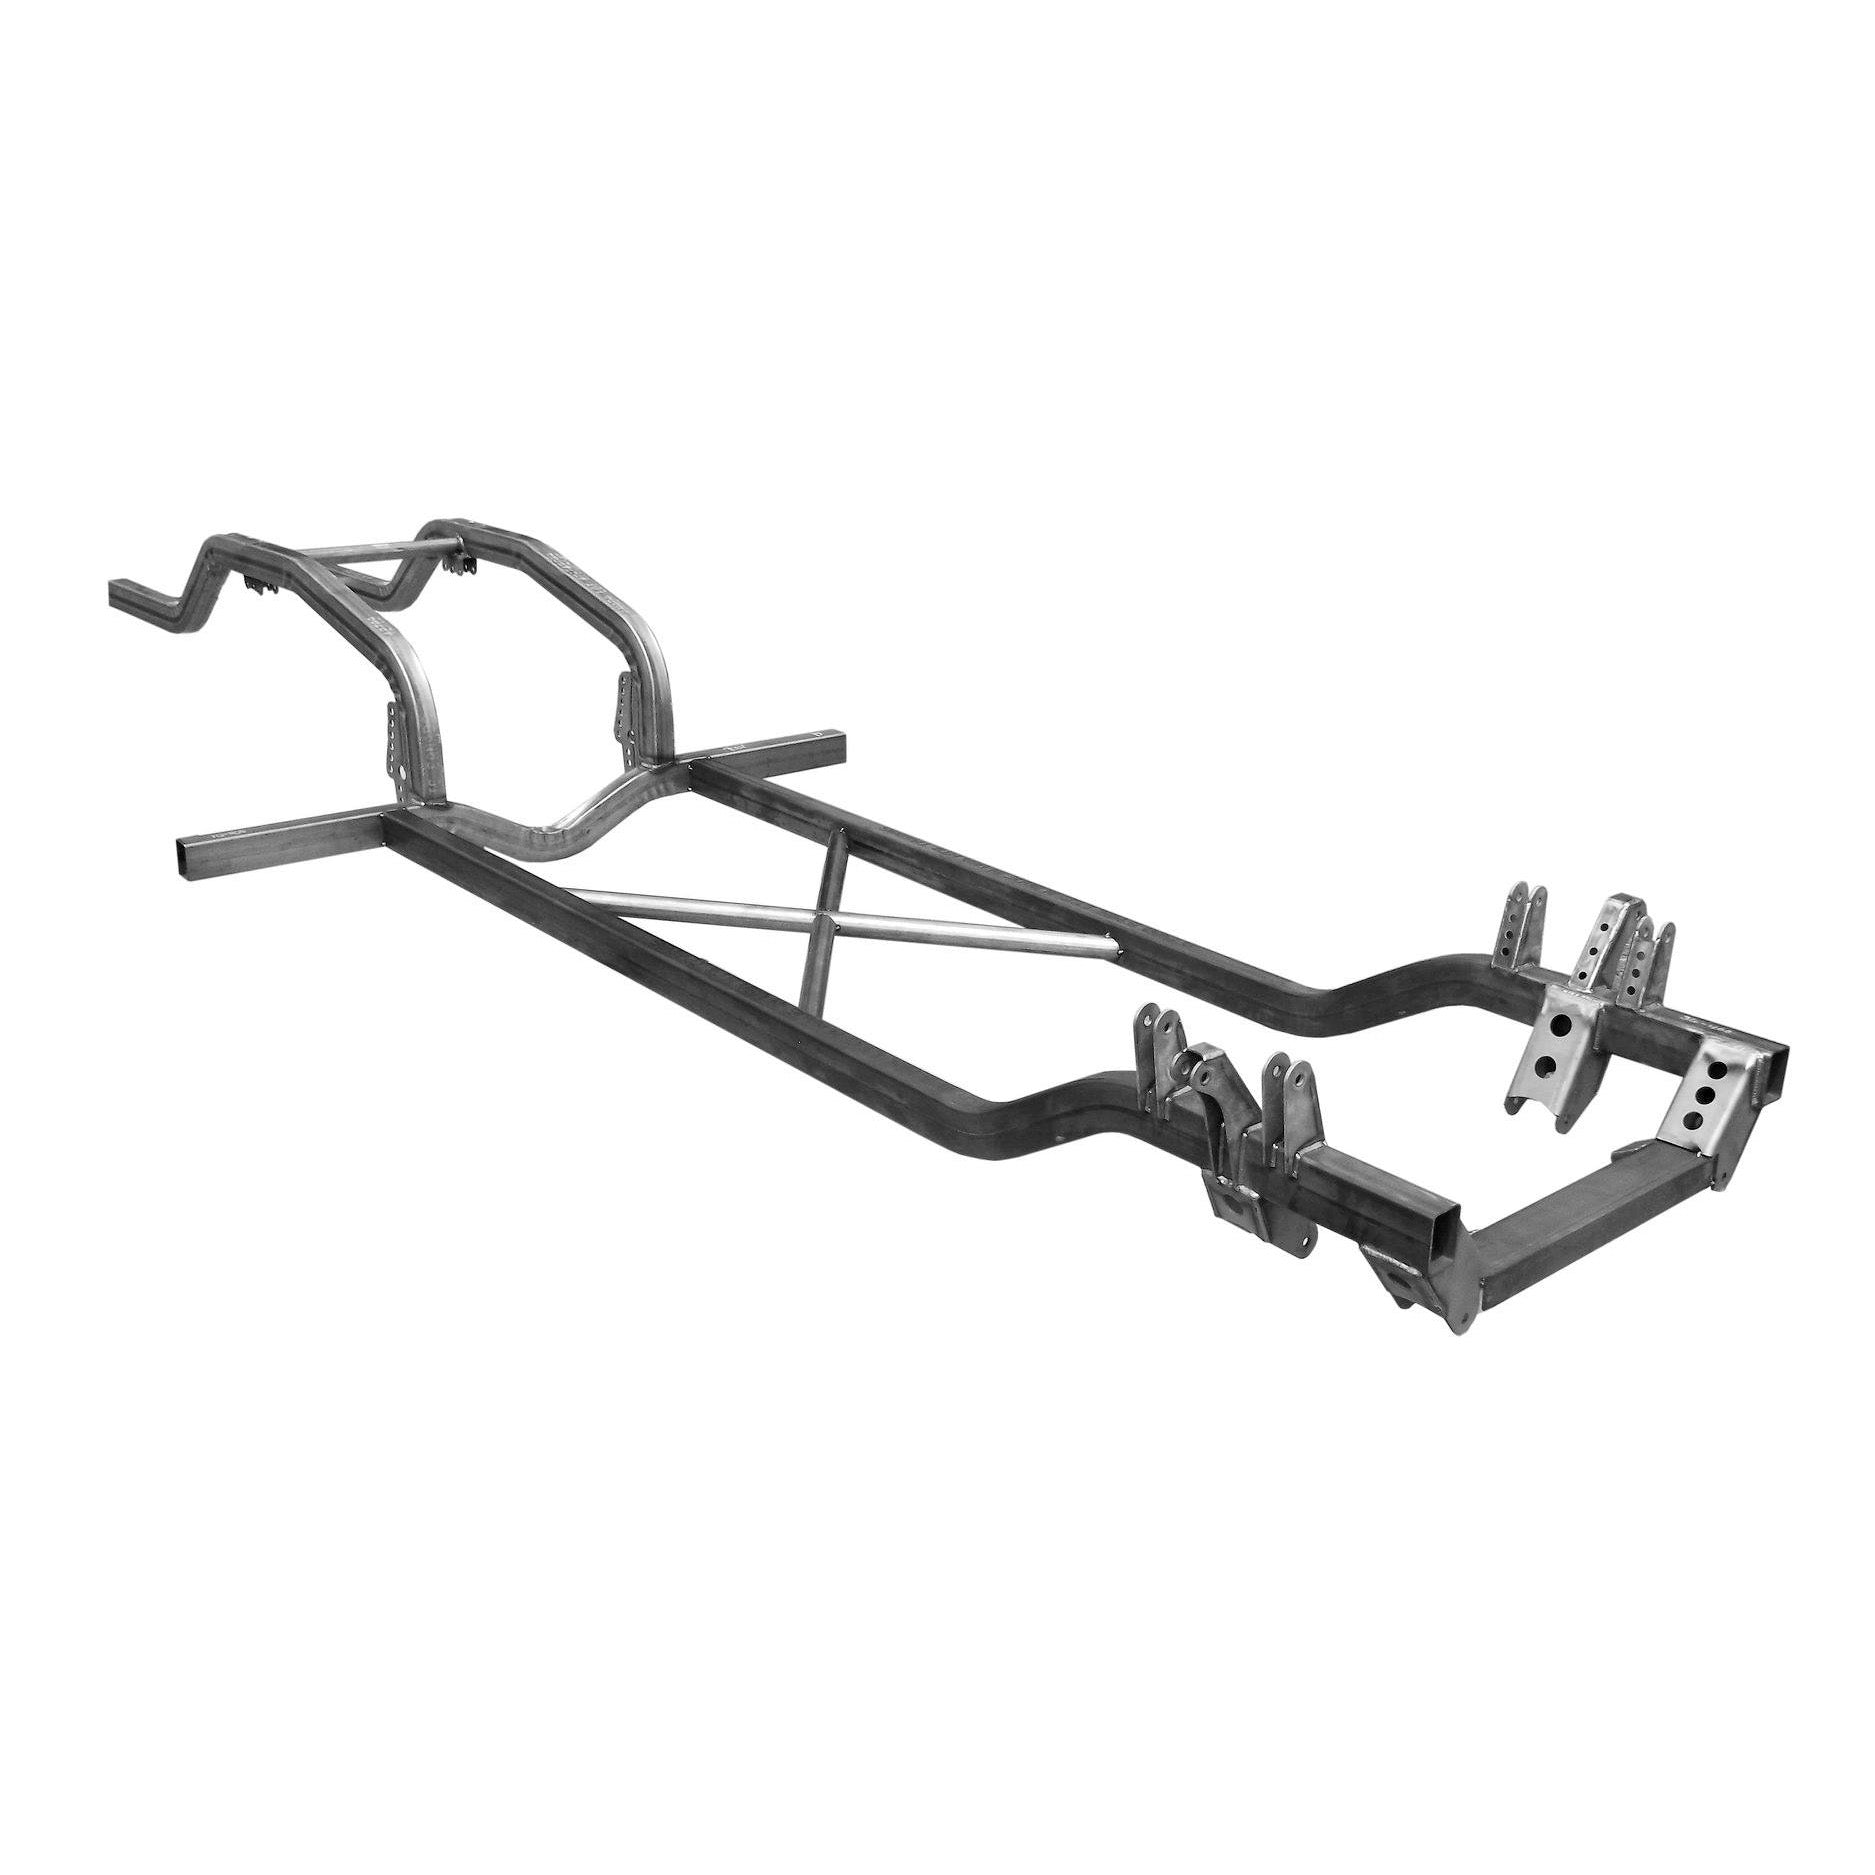 Front A-Arm & 4-Link Universal Welded Frame Kit